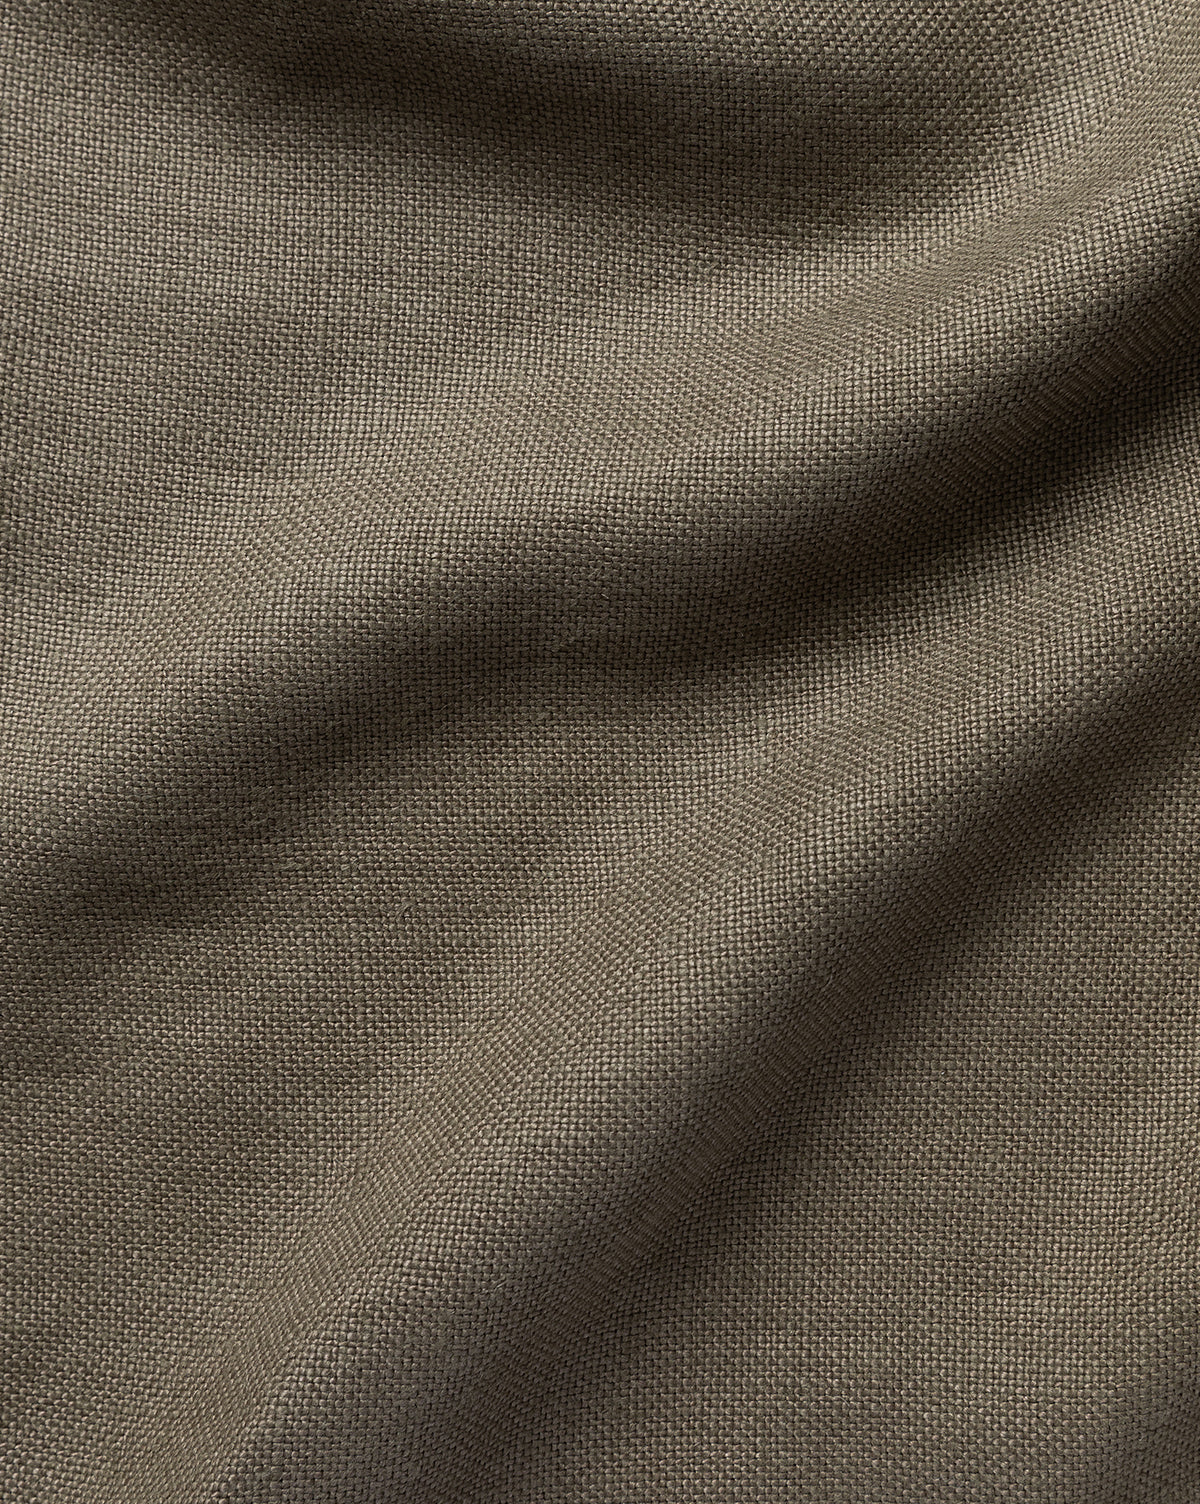 McGee & Co., Linen Upholstery Swatch